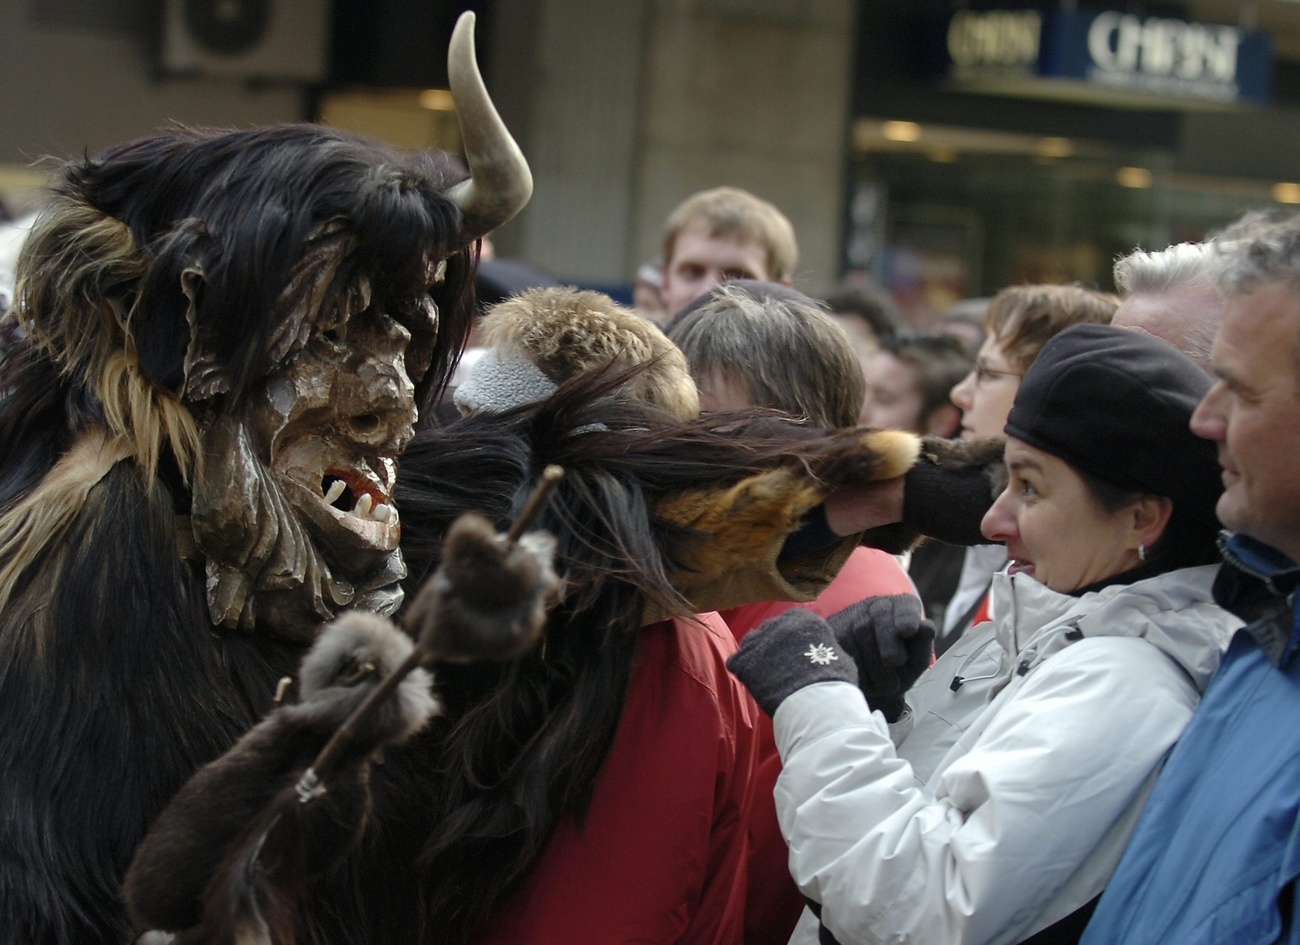 Masked person acting out a traditional Swiss custom, shocks a member of the public.